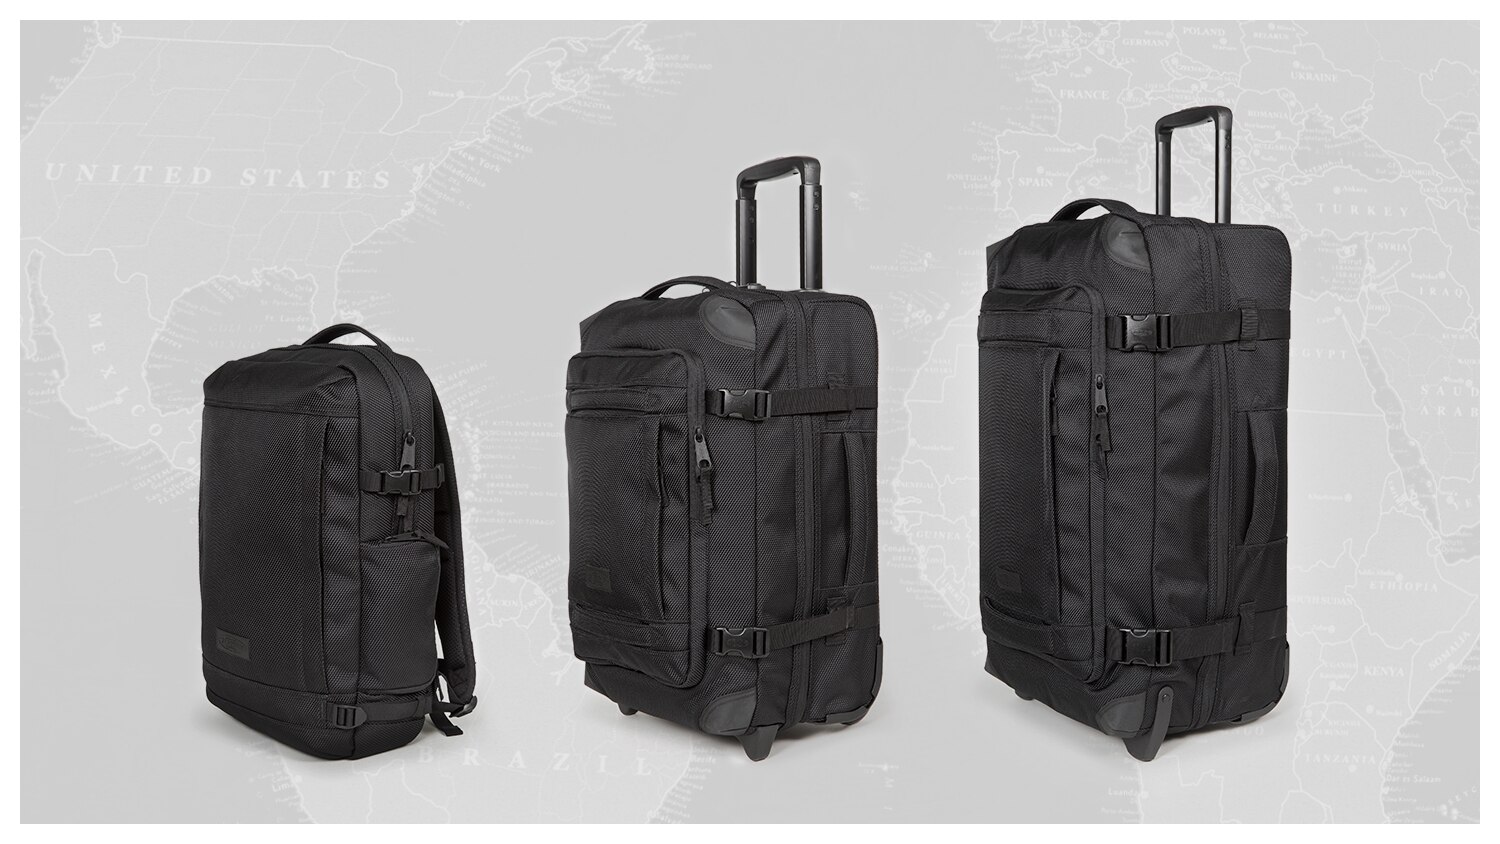 Three Ways To Upgrade Your Travel Gear In 2020 | The Journal | MR PORTER